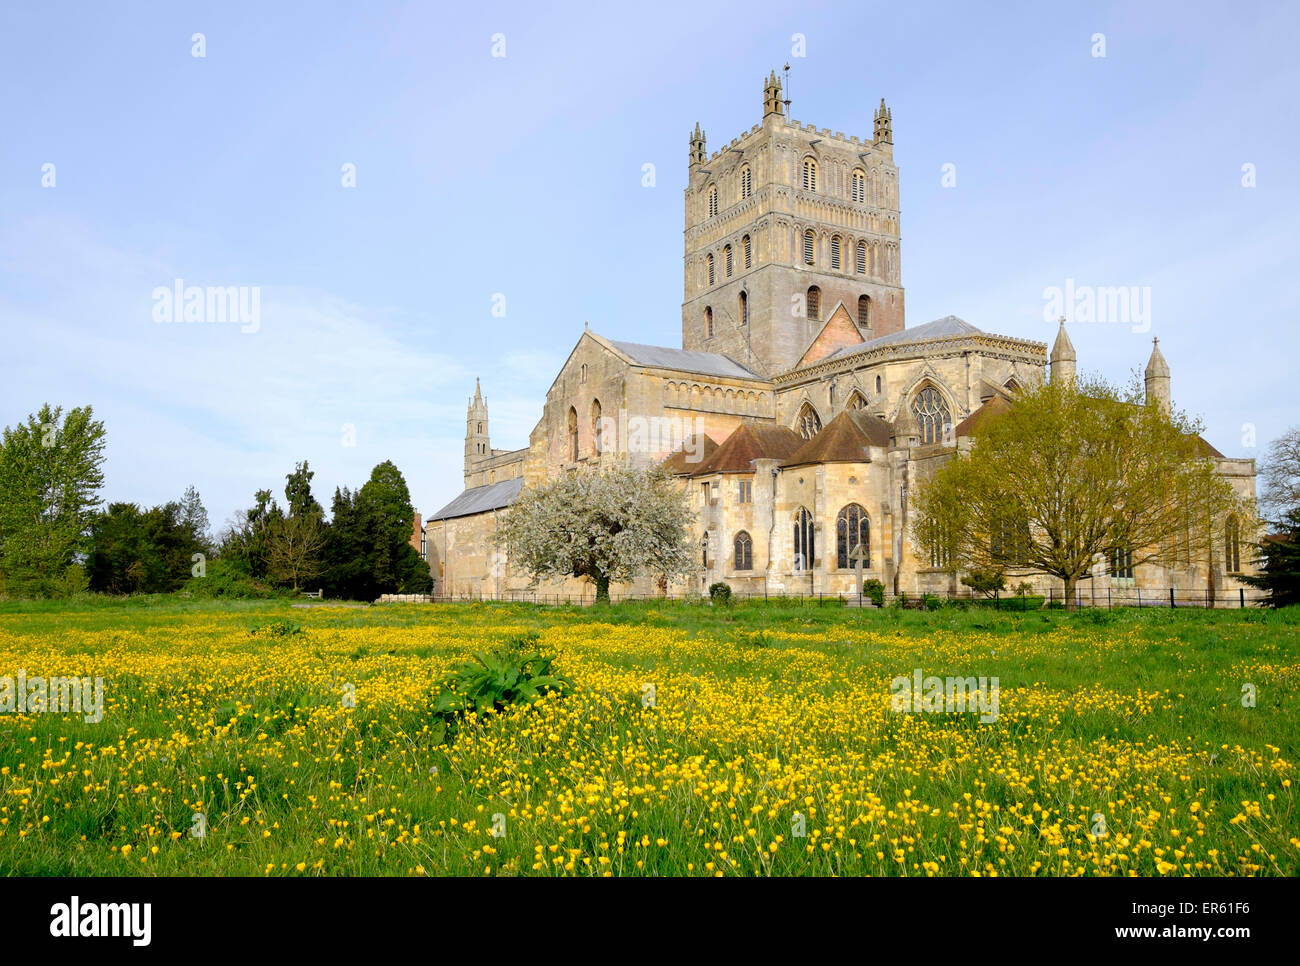 The Abbey church of St Mary the Virgin, Tewkesbury, Gloucestershire, England Stock Photo